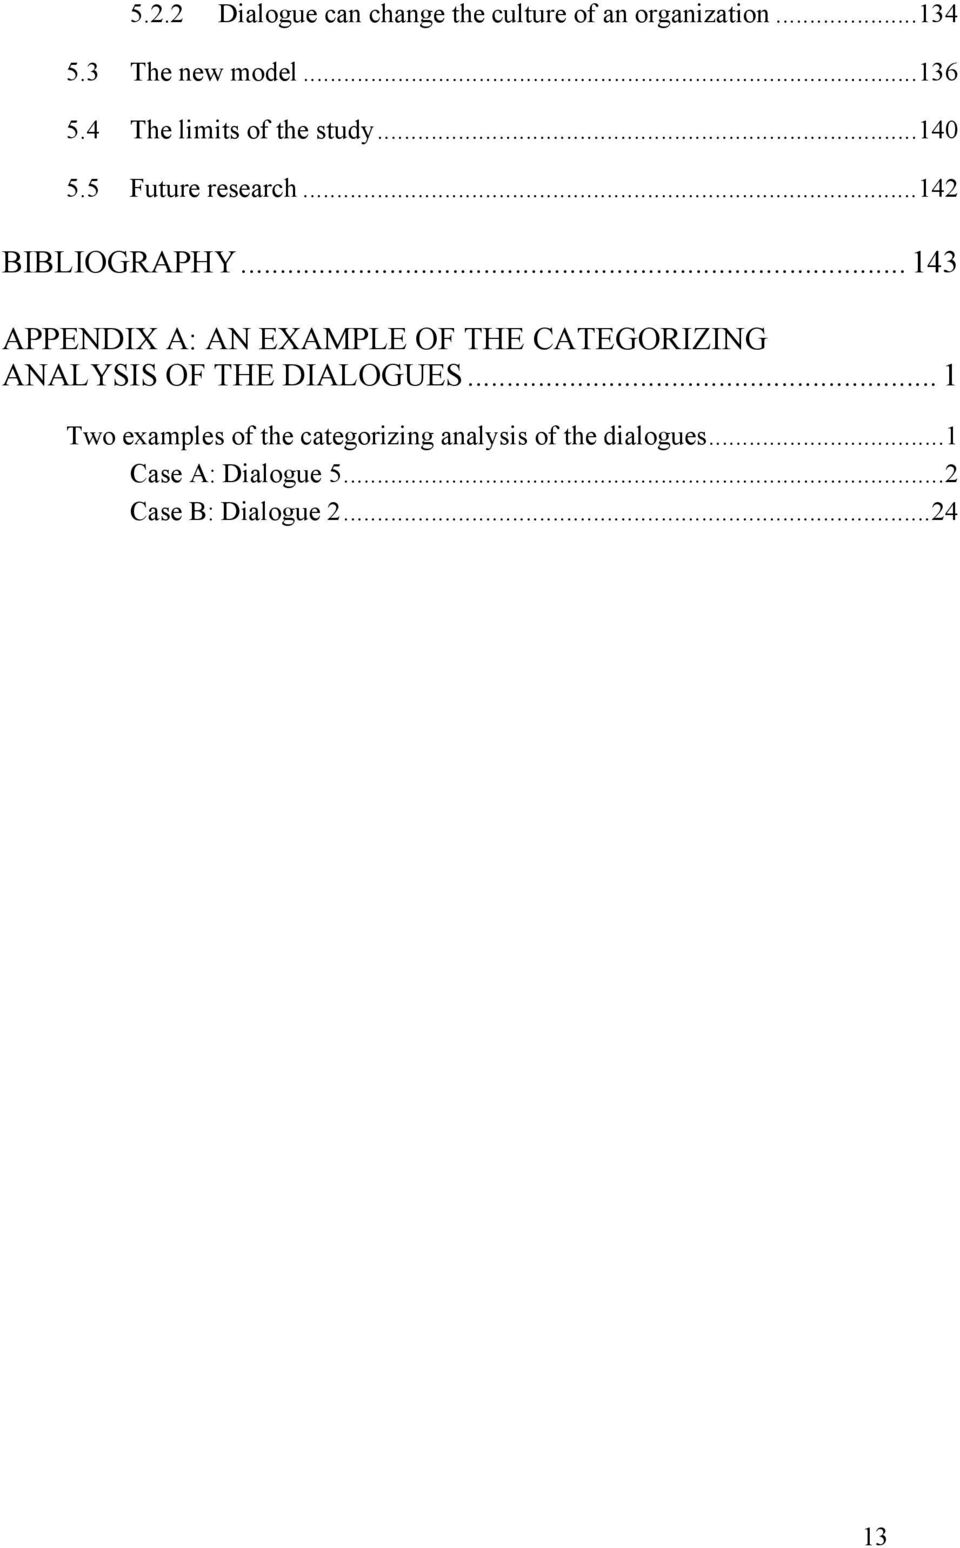 .. 143 APPENDIX A: AN EXAMPLE OF THE CATEGORIZING ANALYSIS OF THE DIALOGUES.